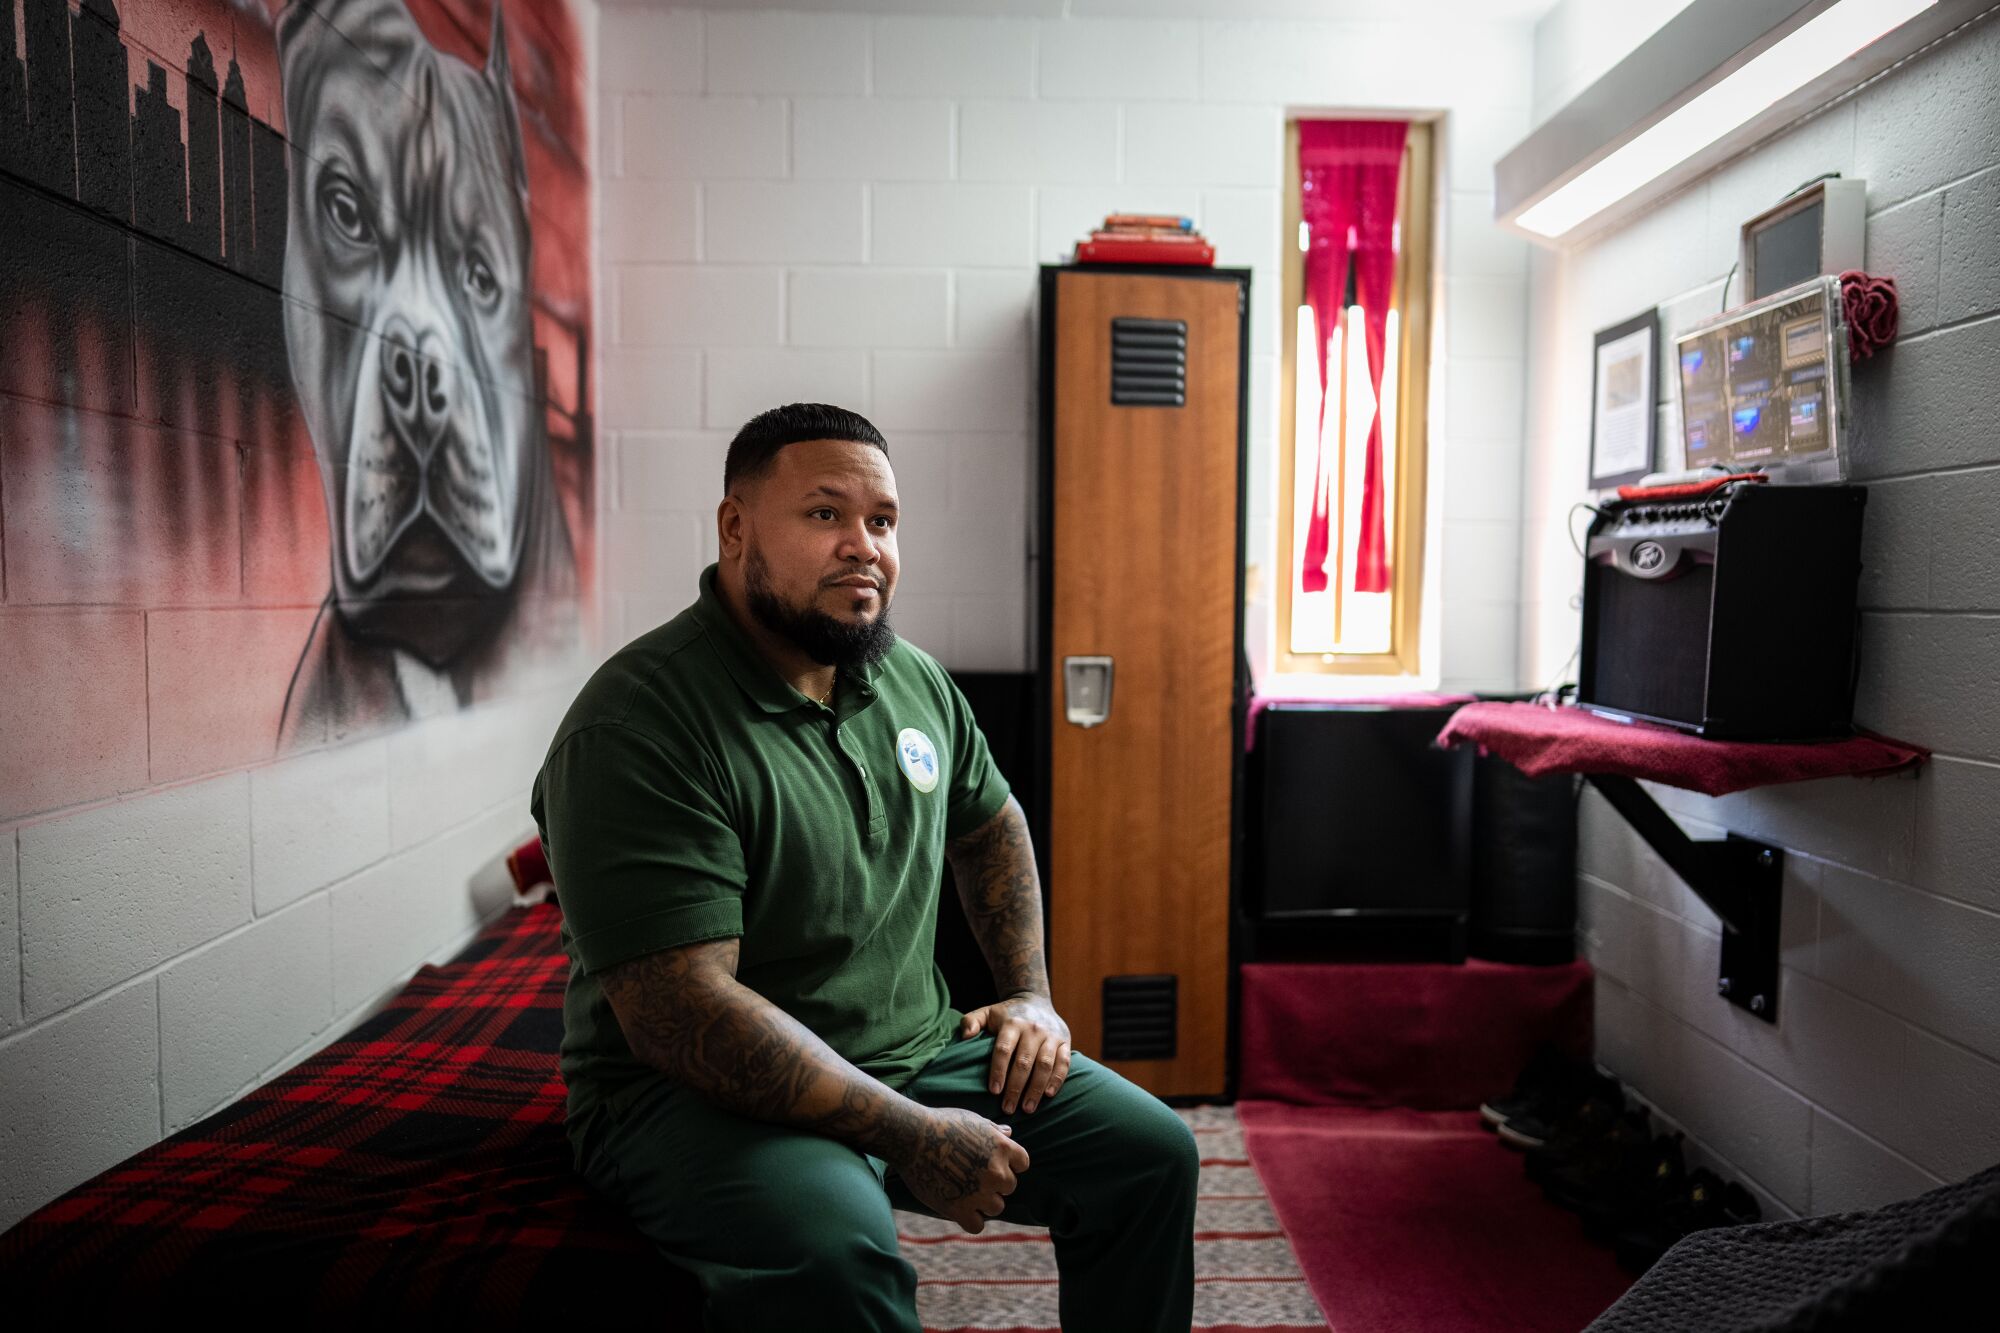 Luis sits in his colorful cell in the "Little Scandinavia" unit at the Pennsylvania State Correctional Institution.